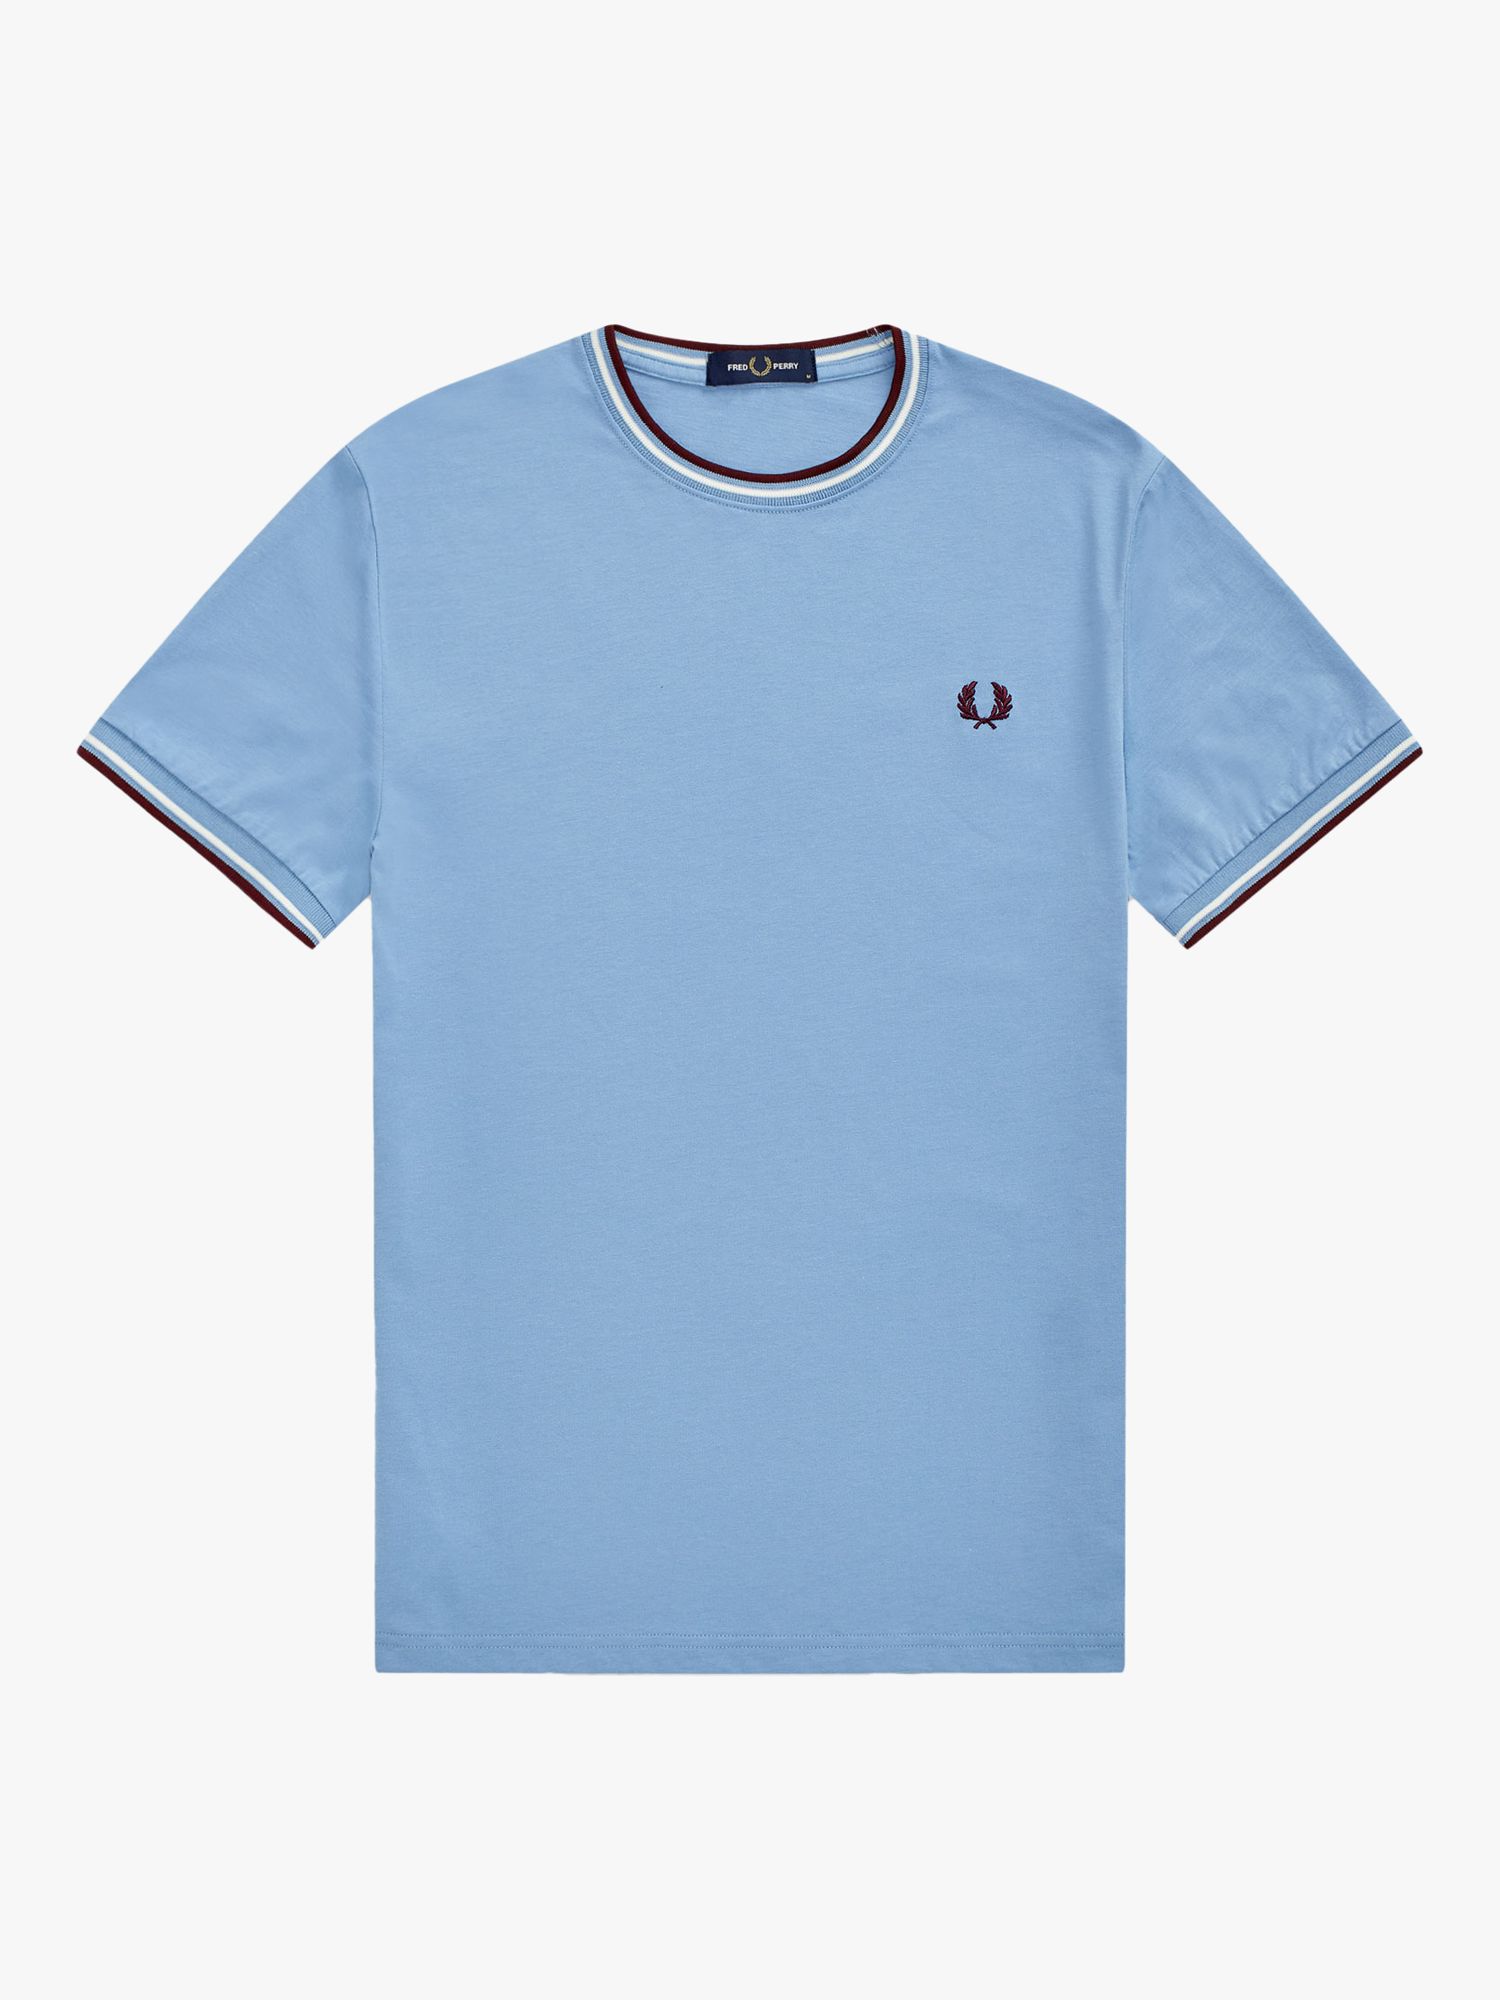 Fred Perry Crew Neck Twin Tipped T-Shirt | Light Blue at John Lewis & Partners